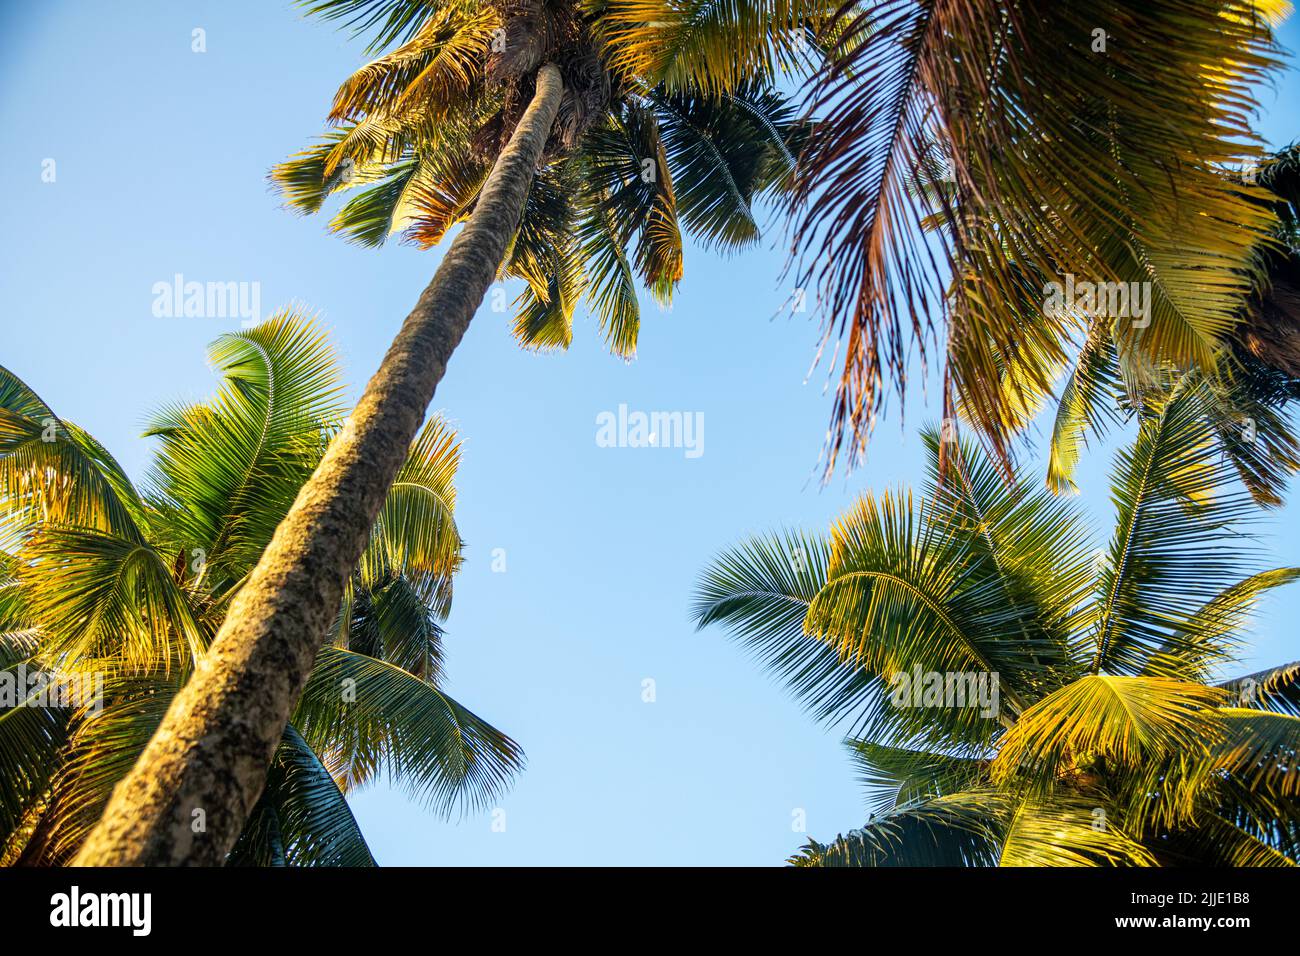 A view of the moon during the day through palm trees in the San Blas Islands in Panama Stock Photo